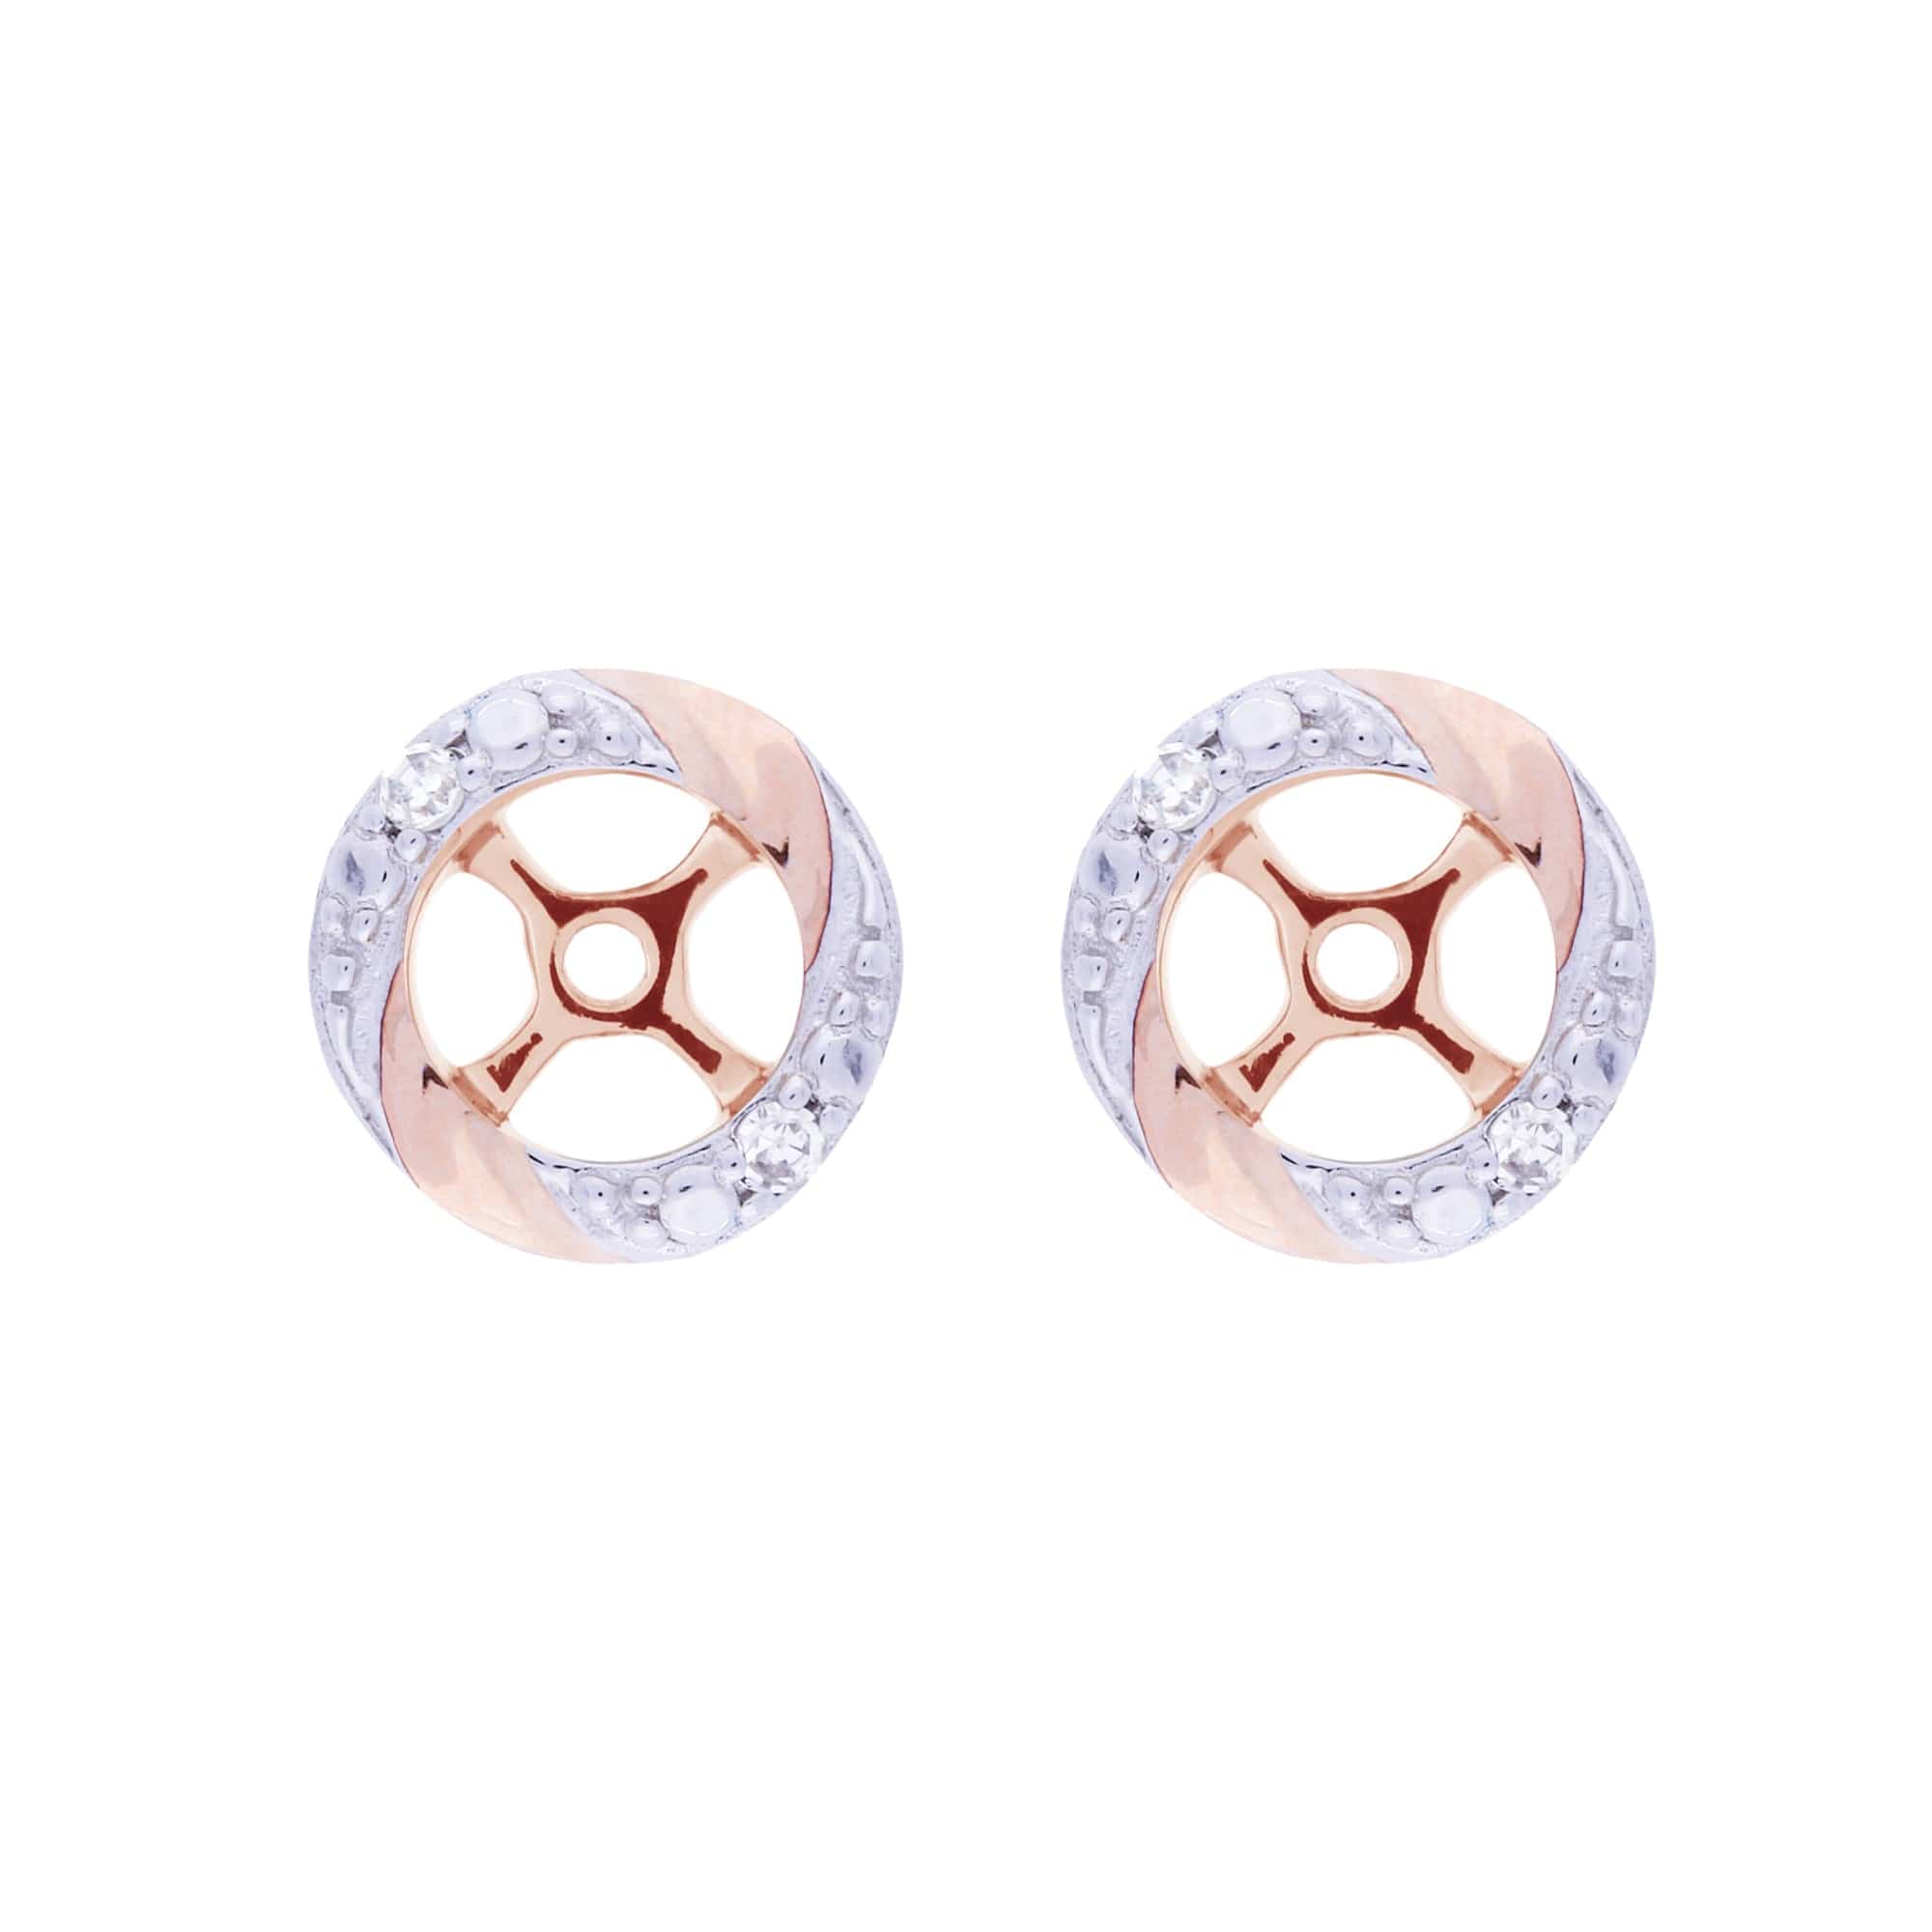 Classic Round Mystic Topaz Stud Earrings with Detachable Diamond Round Earrings Jacket Set in 9ct Rose Gold - Gemondo